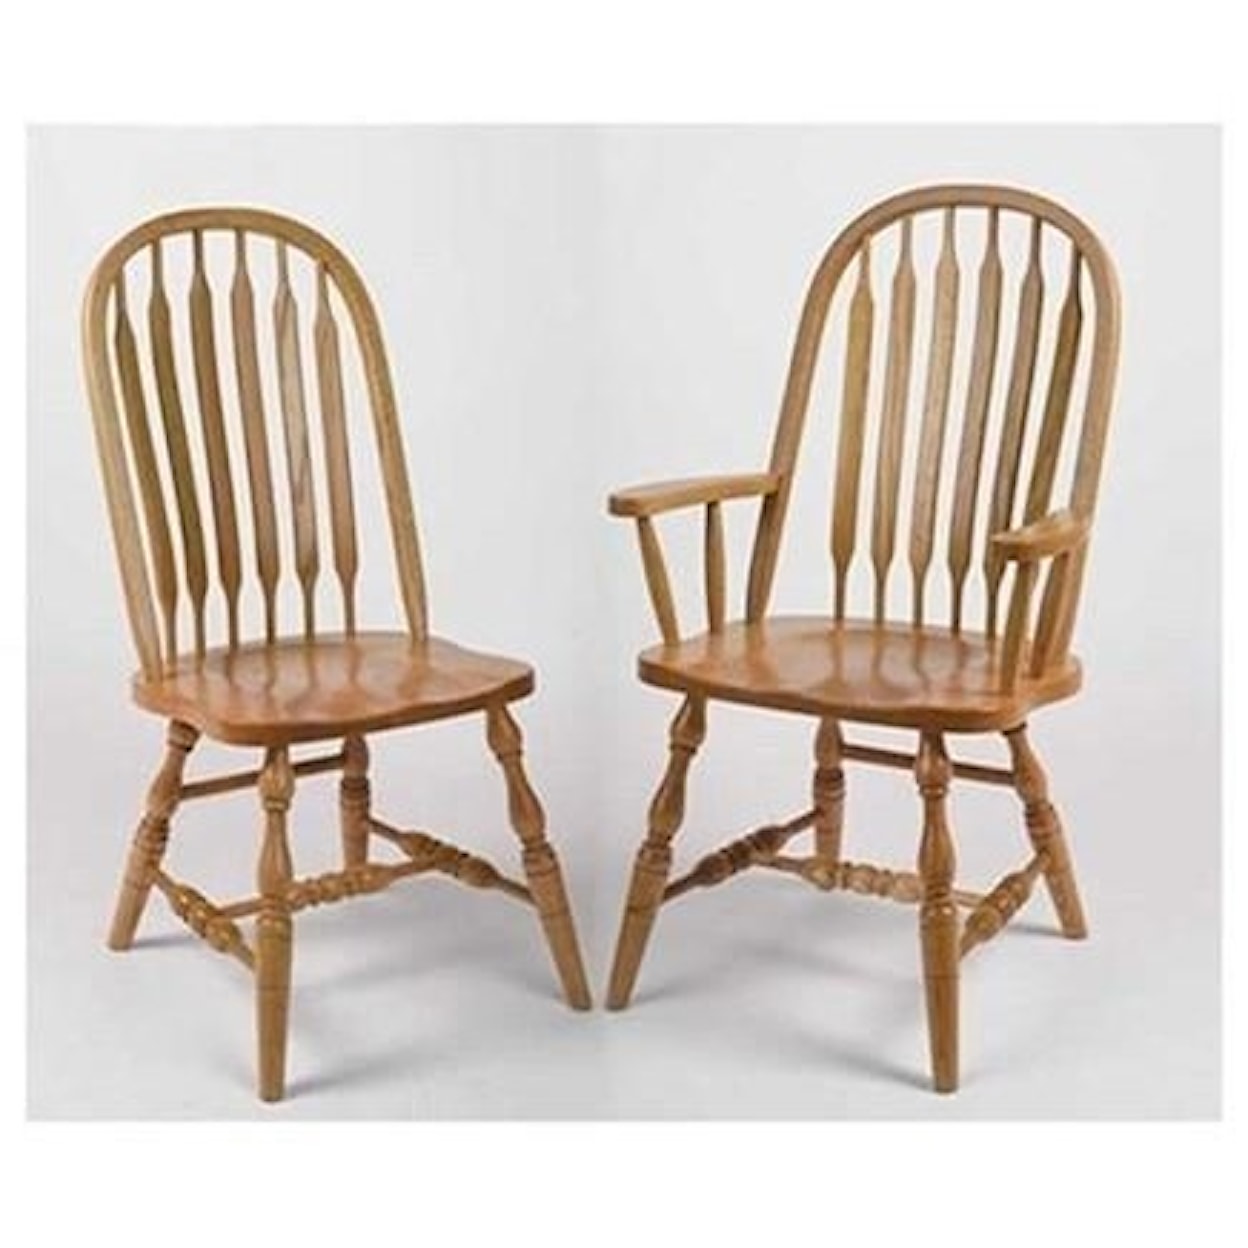 Horseshoe Bend Bent Paddle Deluxe Bent Paddle High Back Arm Chair